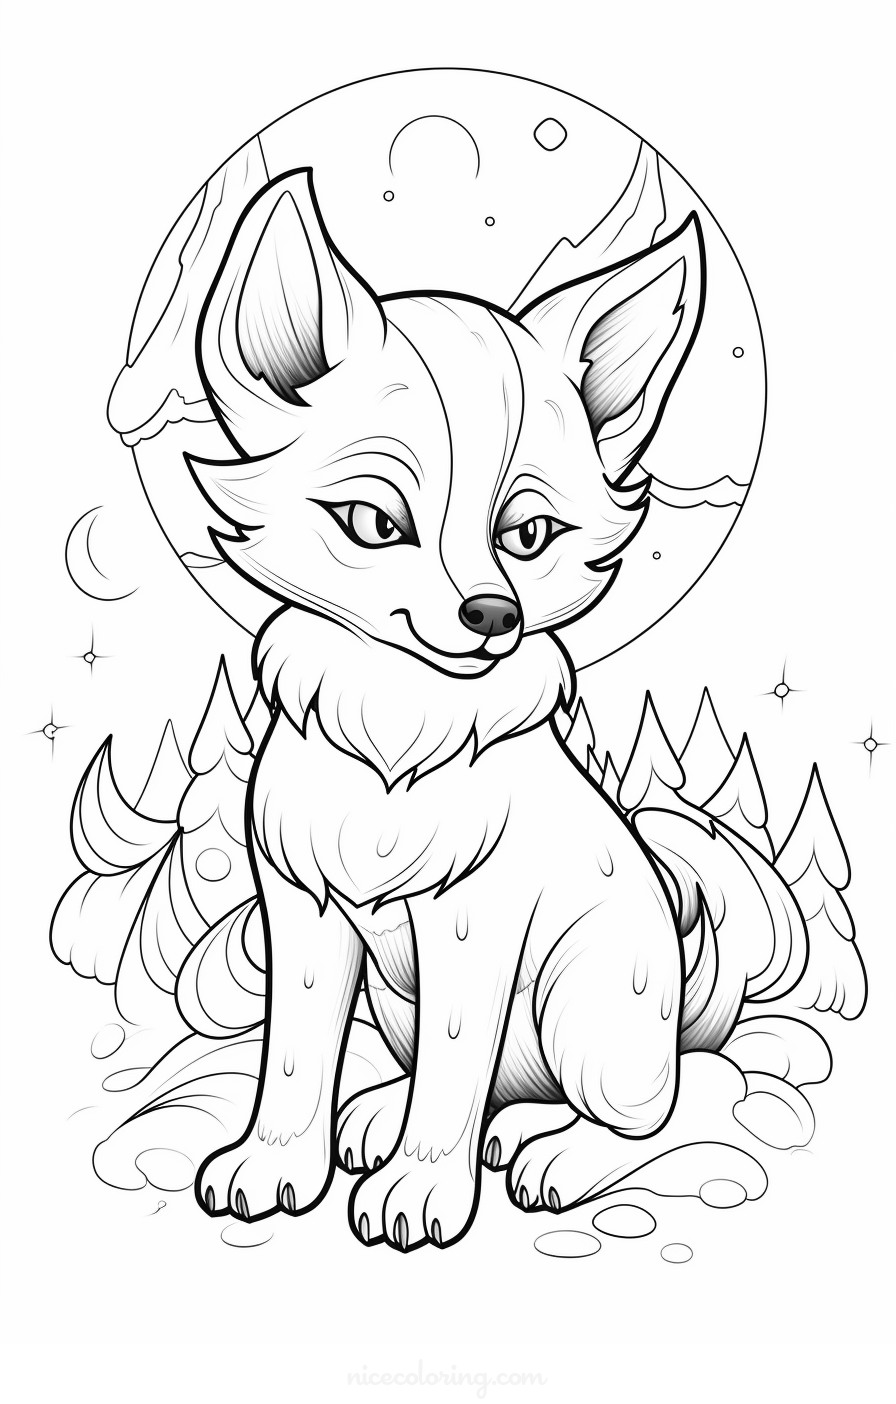 A coloring page of a majestic wolf in a forest scene